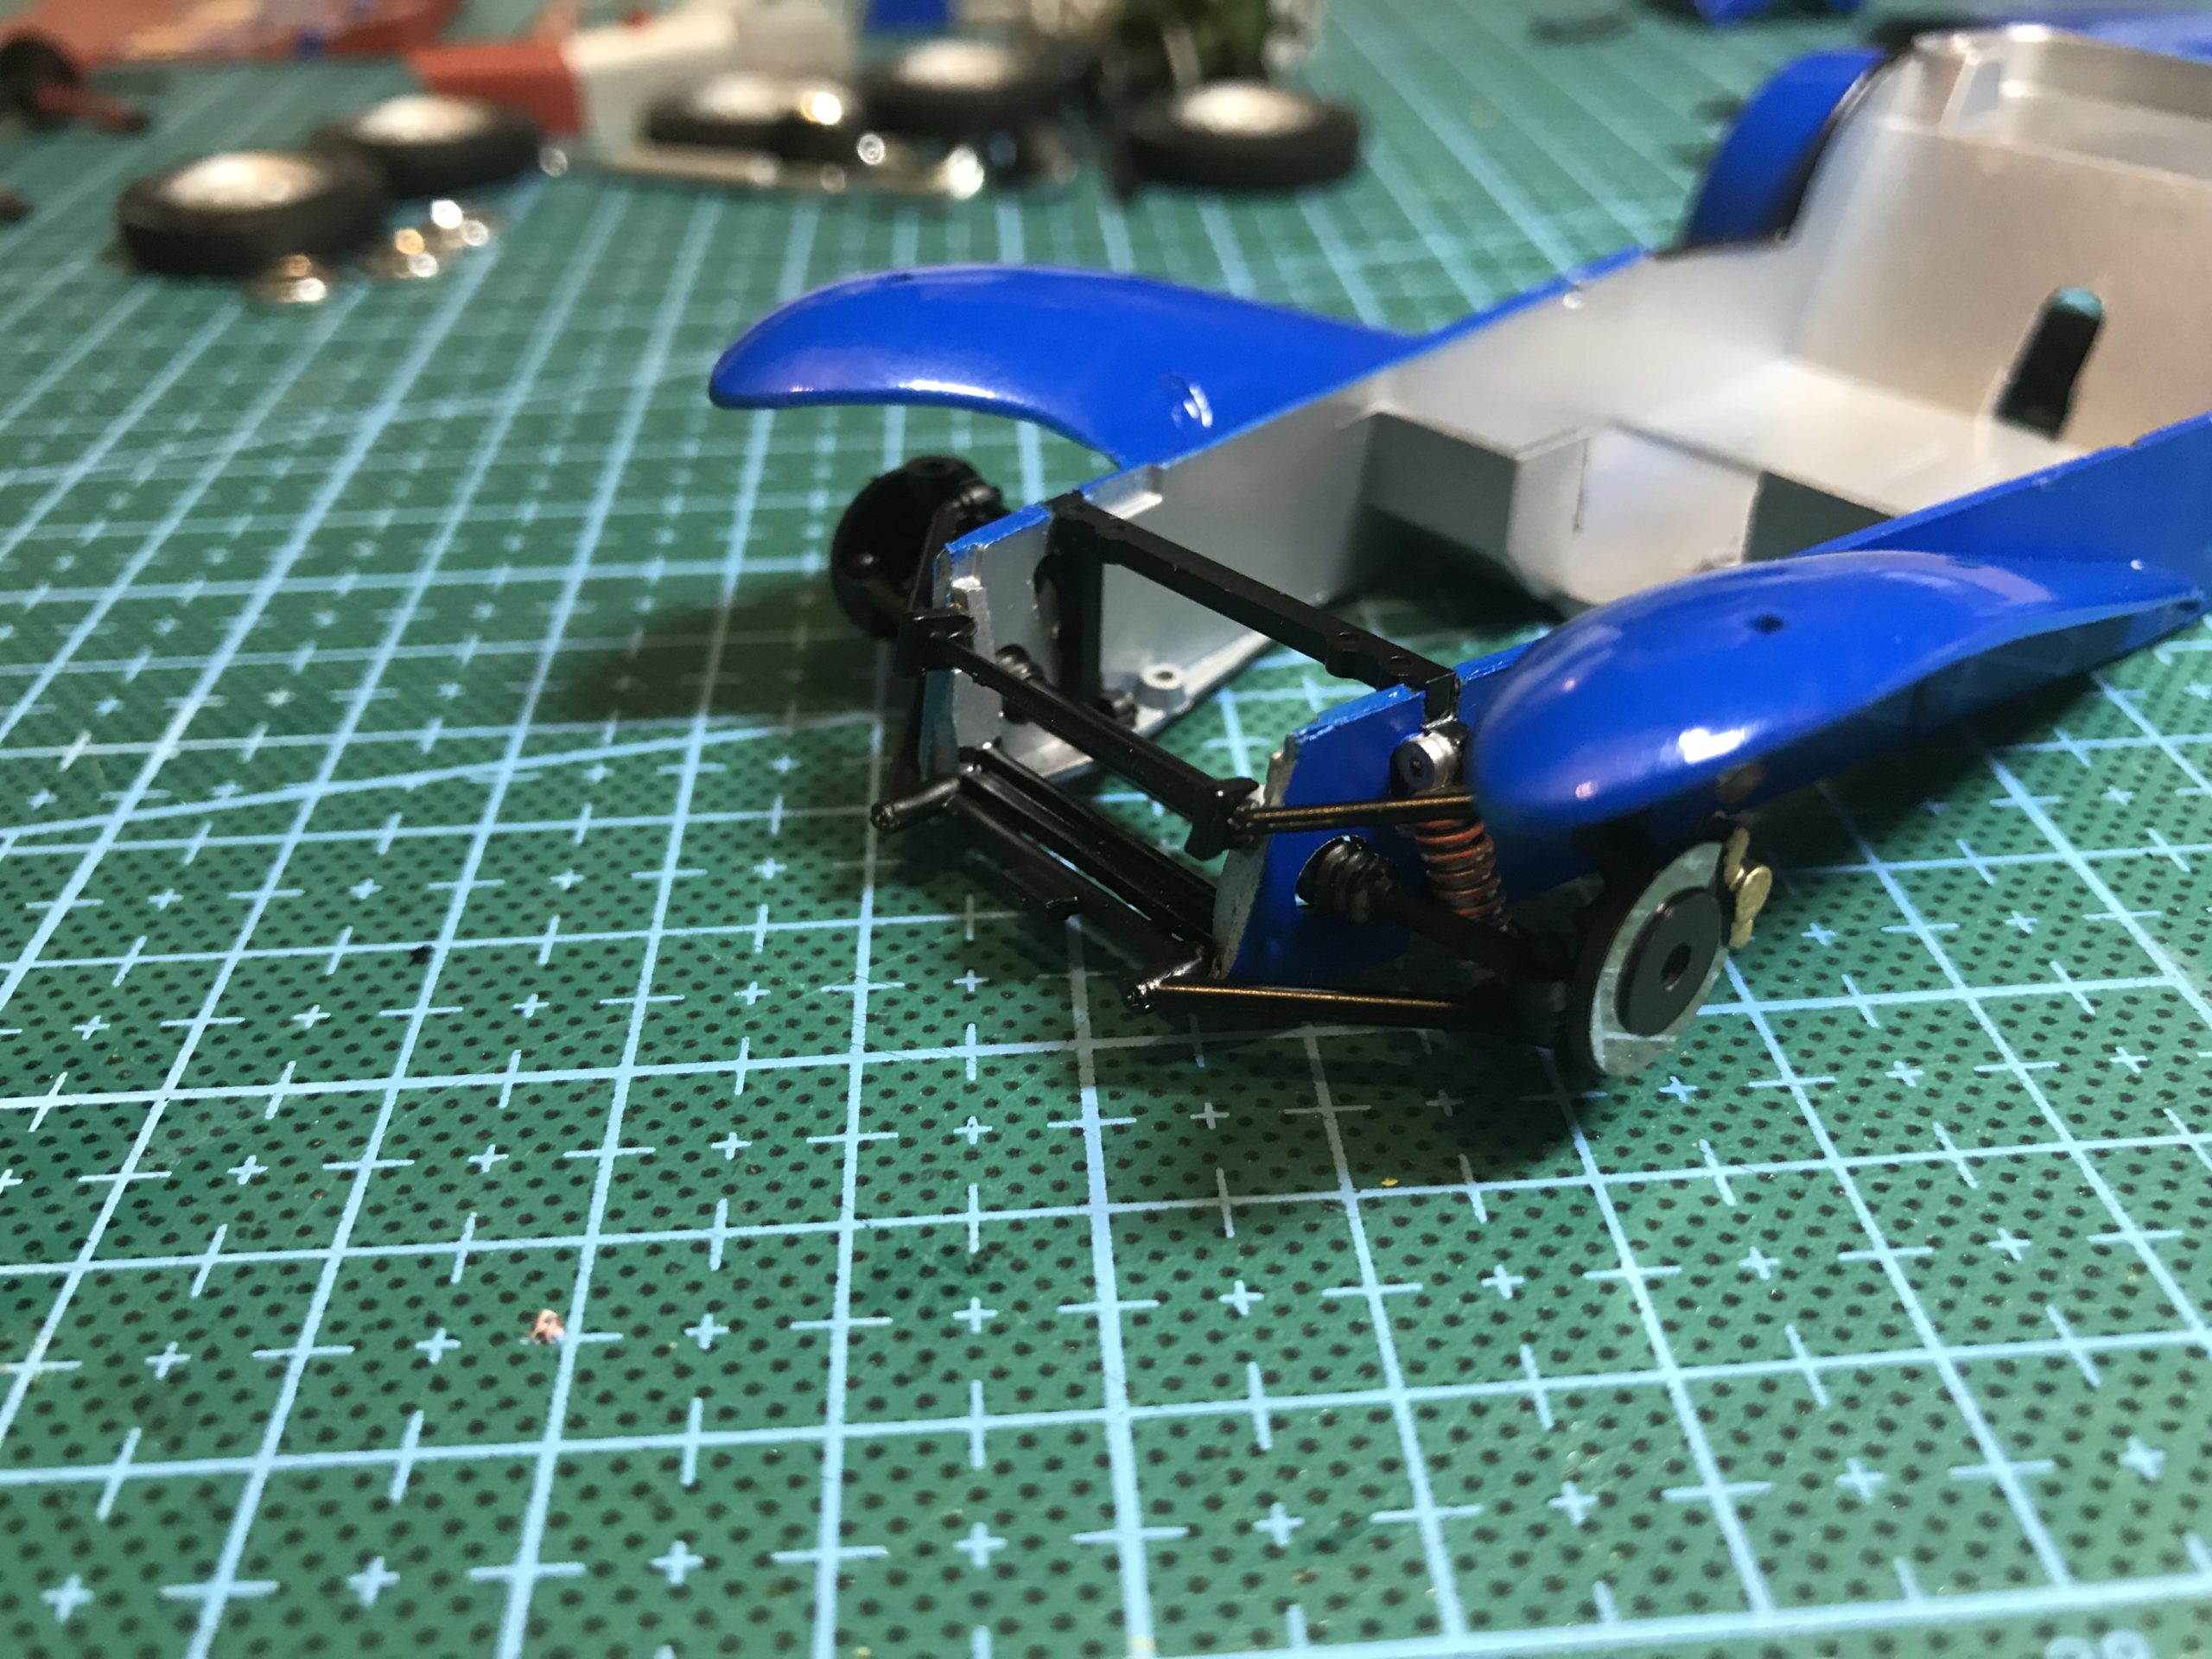 Laid some paint and clear down on these two today. Tamiya Lotus